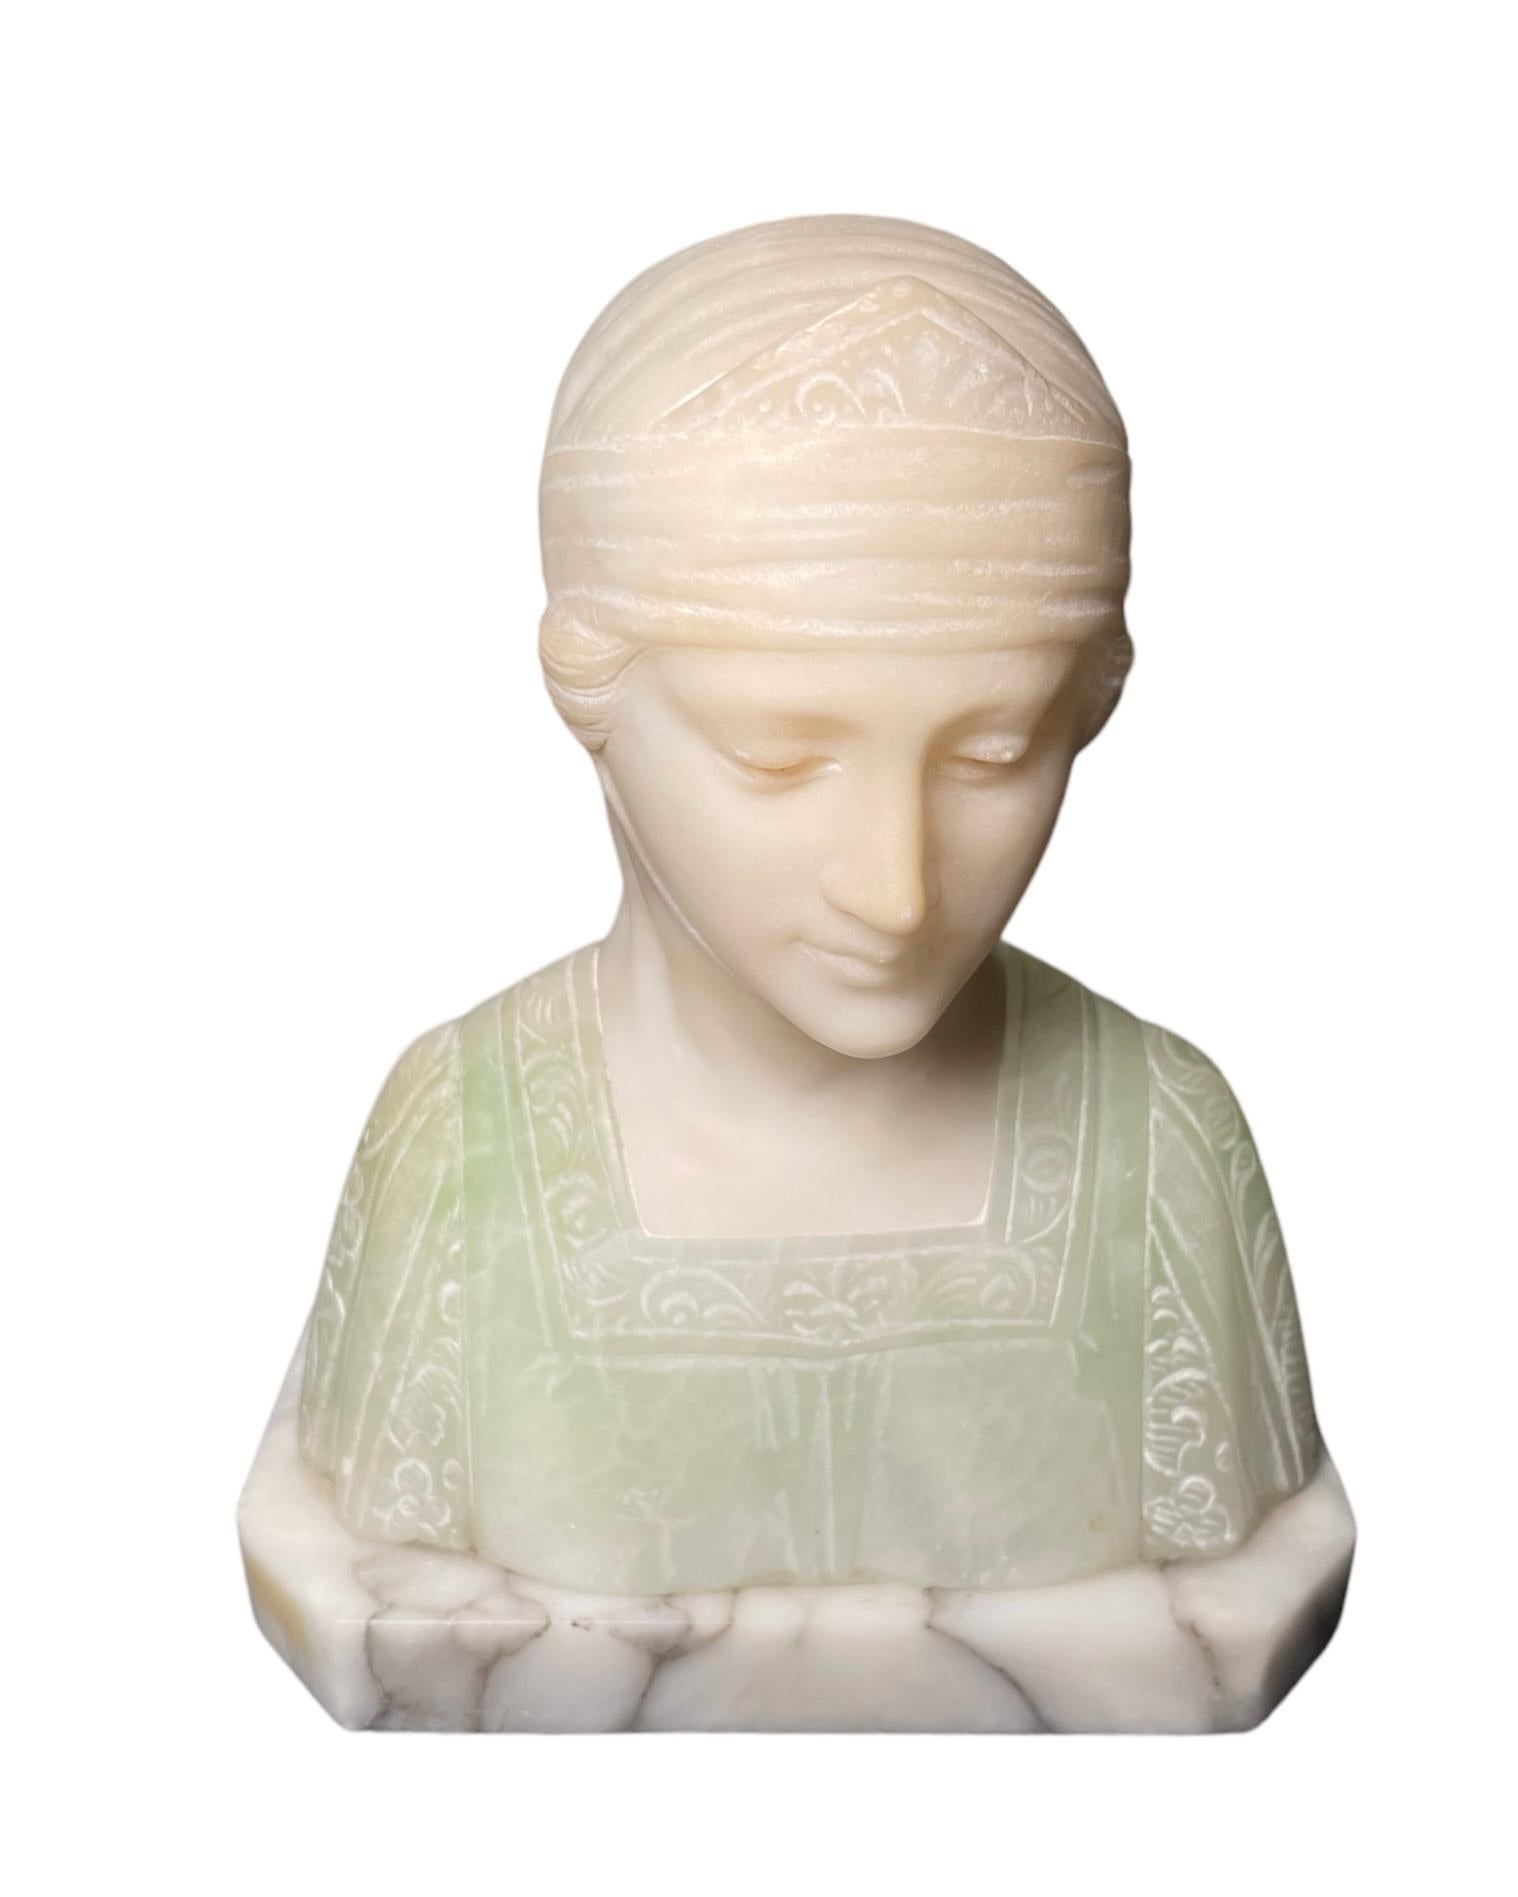 This is a marble and alabaster bust of Beatrice. It depicts a small, but heavy bust of an Italian lady dressed with a Renaissance style costumes. The dress is mint green (it symbolizes Hope) with some carved details in the square collar and the